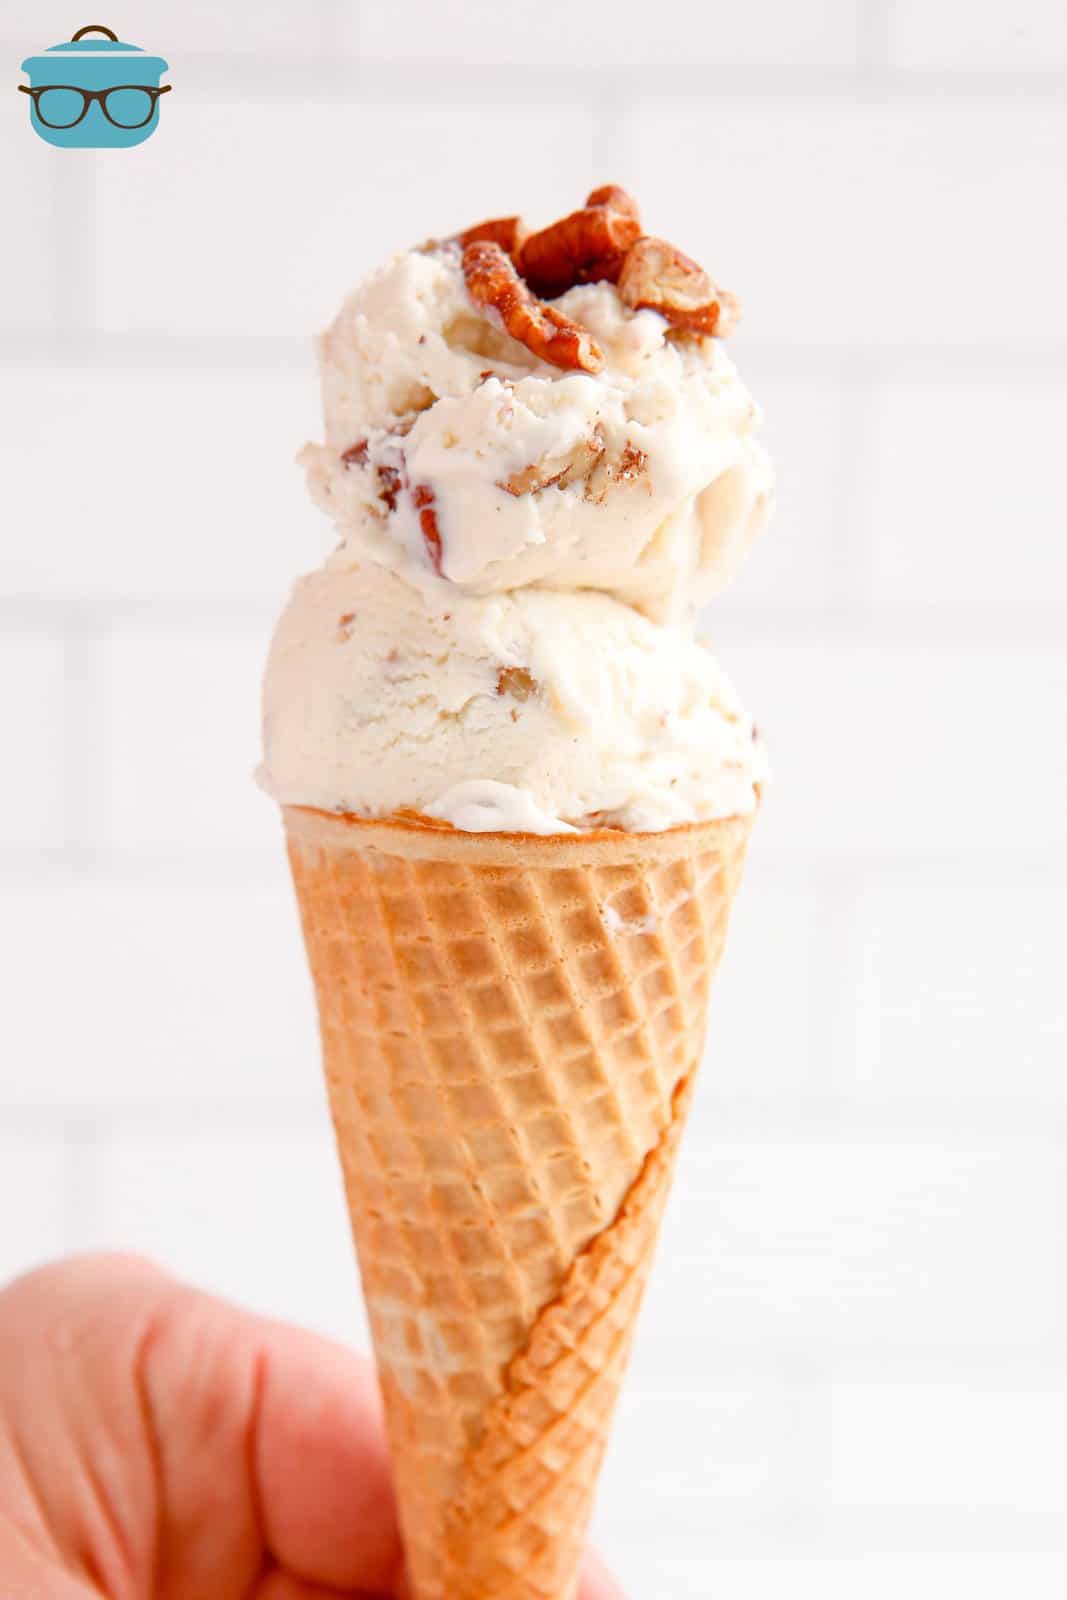 No-Churn Butter Pecan Ice Cream being held by hand in ice cream cone.